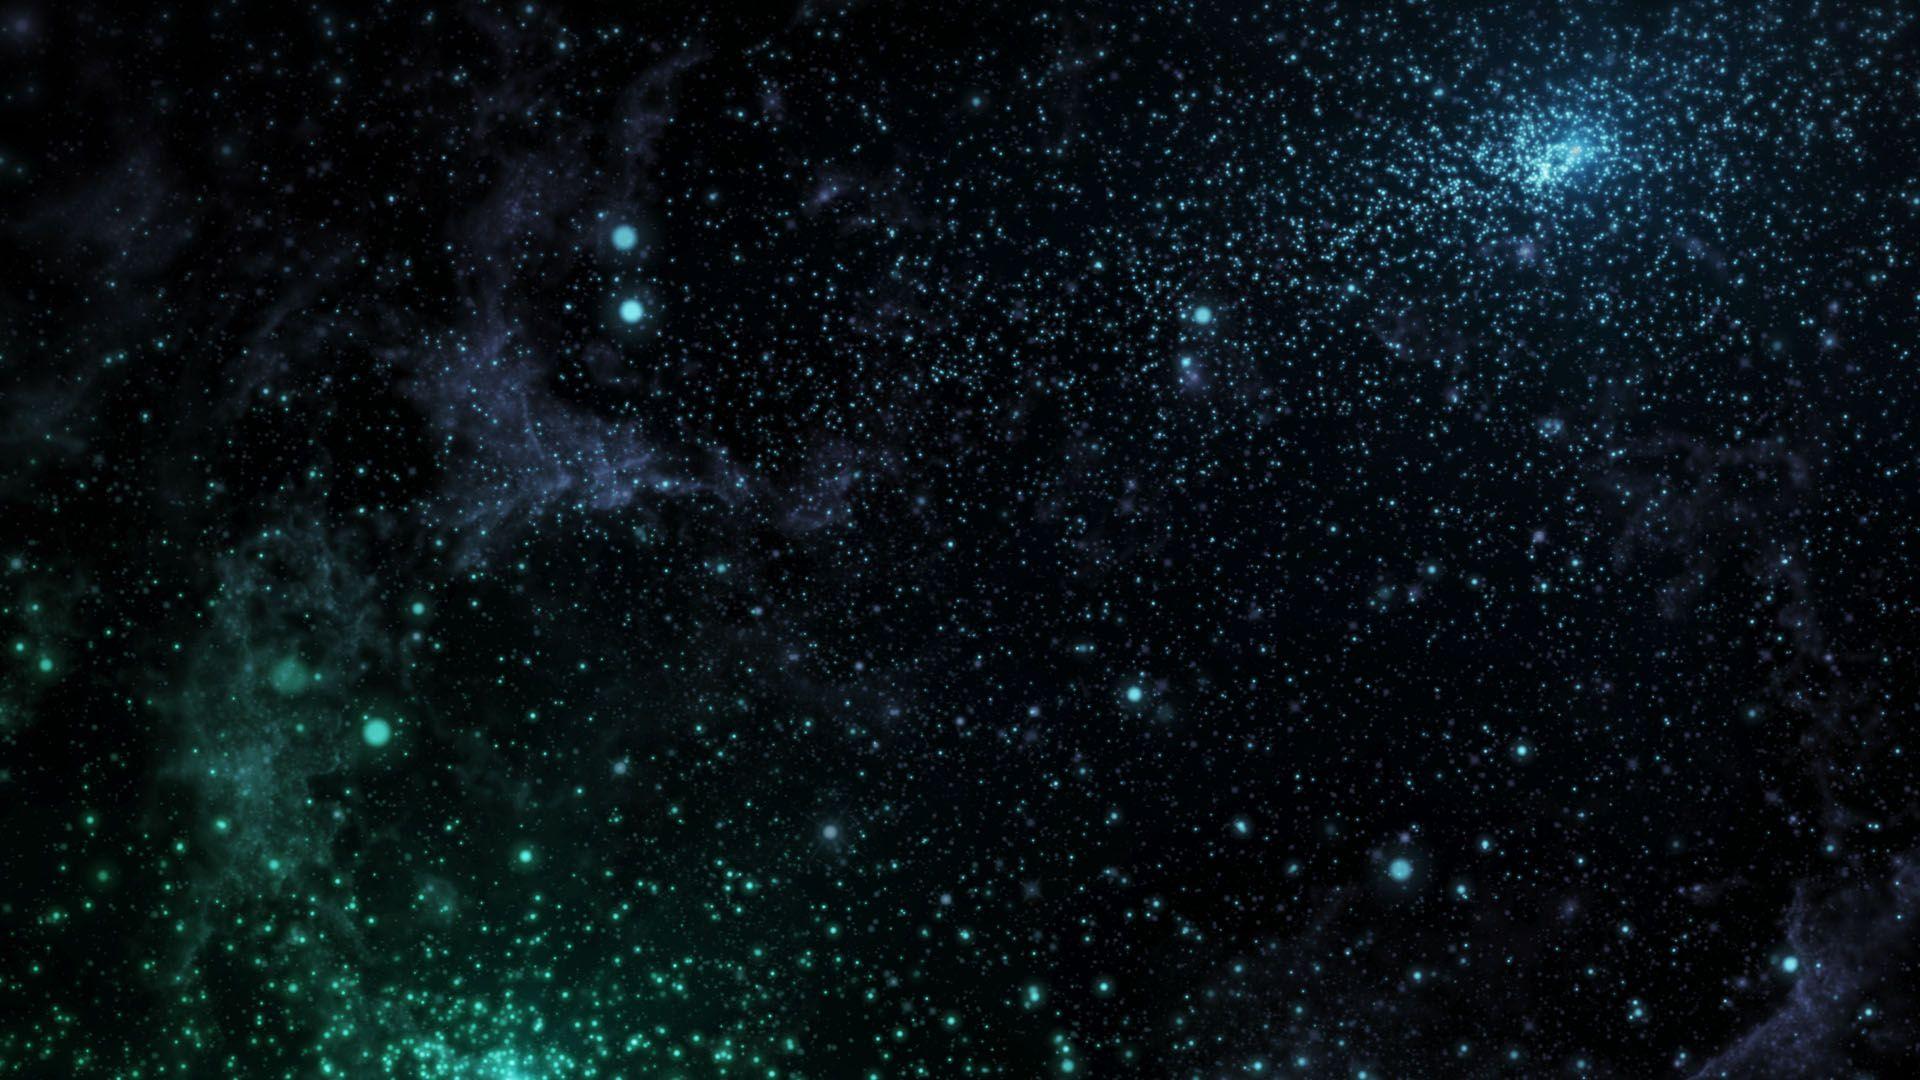 Deep Space Background